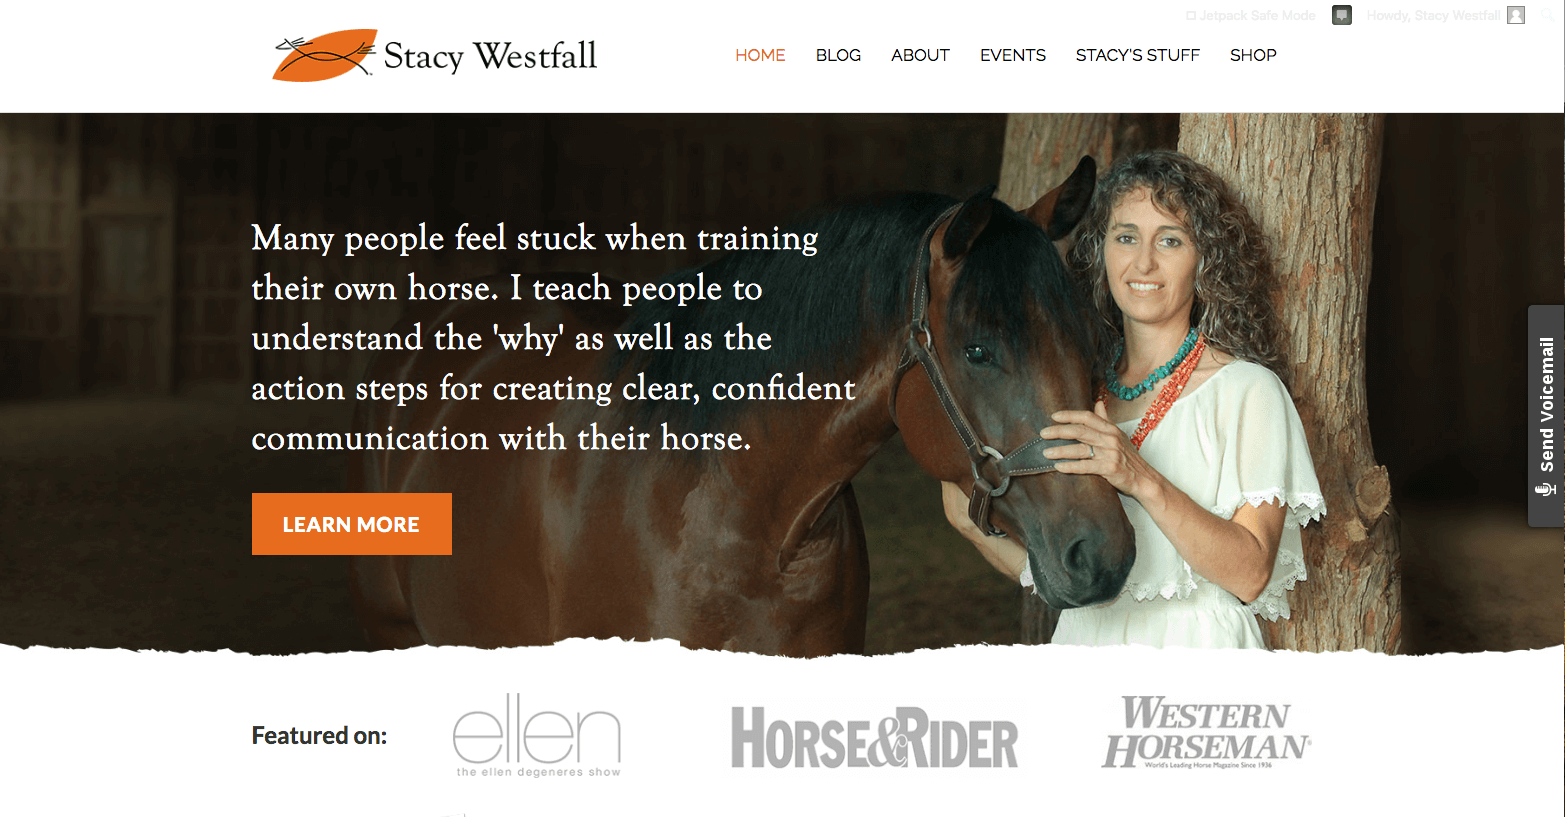 Picking and using a pony horse as a training tool: Stacy’s Video Diary Review - Official Site of Stacy Westfall